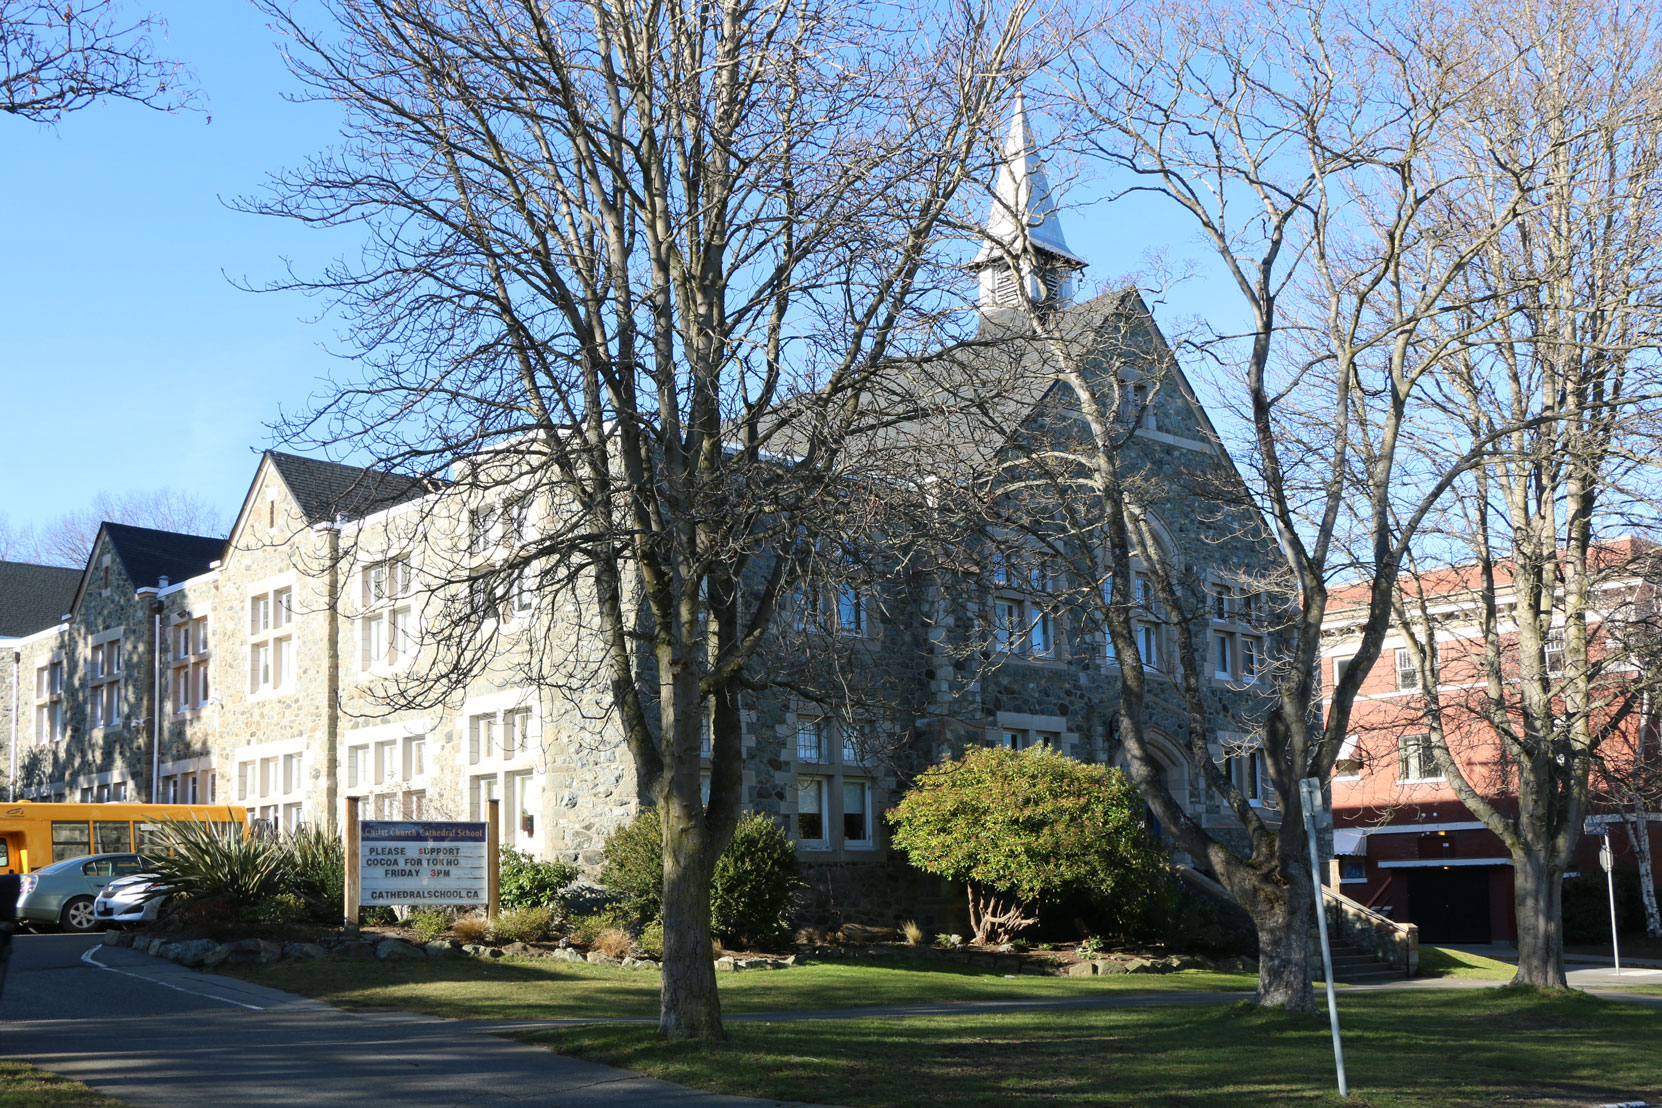 912 Vancouver Street, built in 1923 by architect J.C.M. Keith as the Christ Church cathedral memorial Hall. It is now the Cathedral School (photo: Victoria Online Sightseeing Tours)